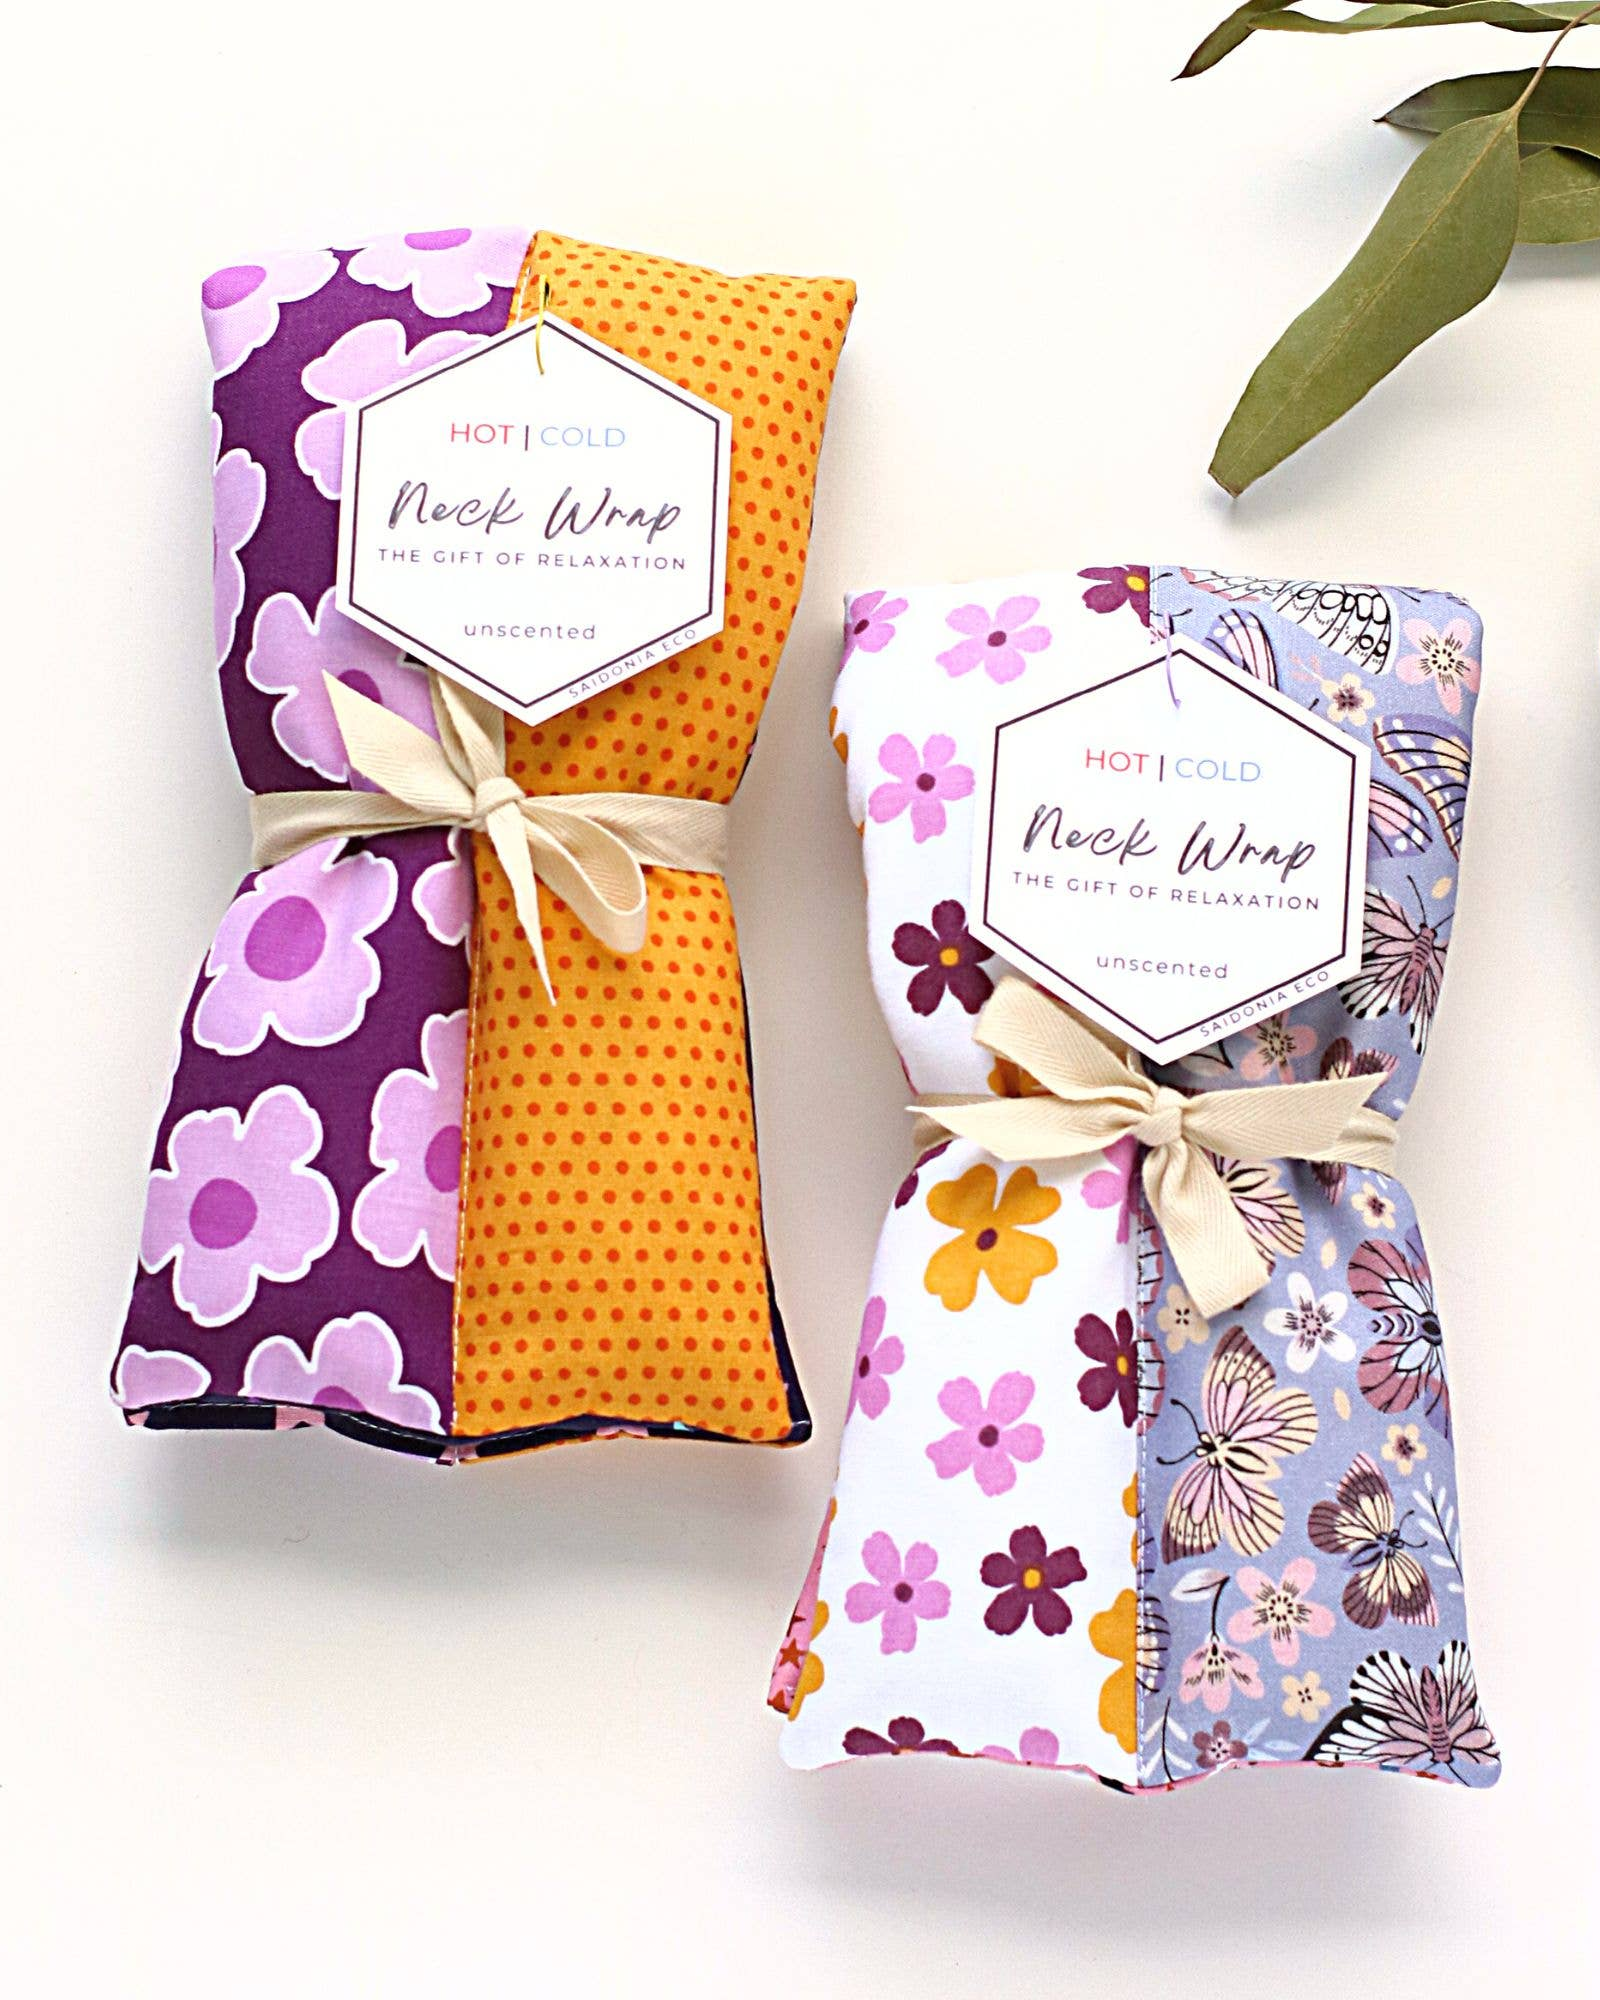 Three fabric hot/cold neck wraps with floral and polka dot designs, tied with ribbons and labeled, arranged on a white background.